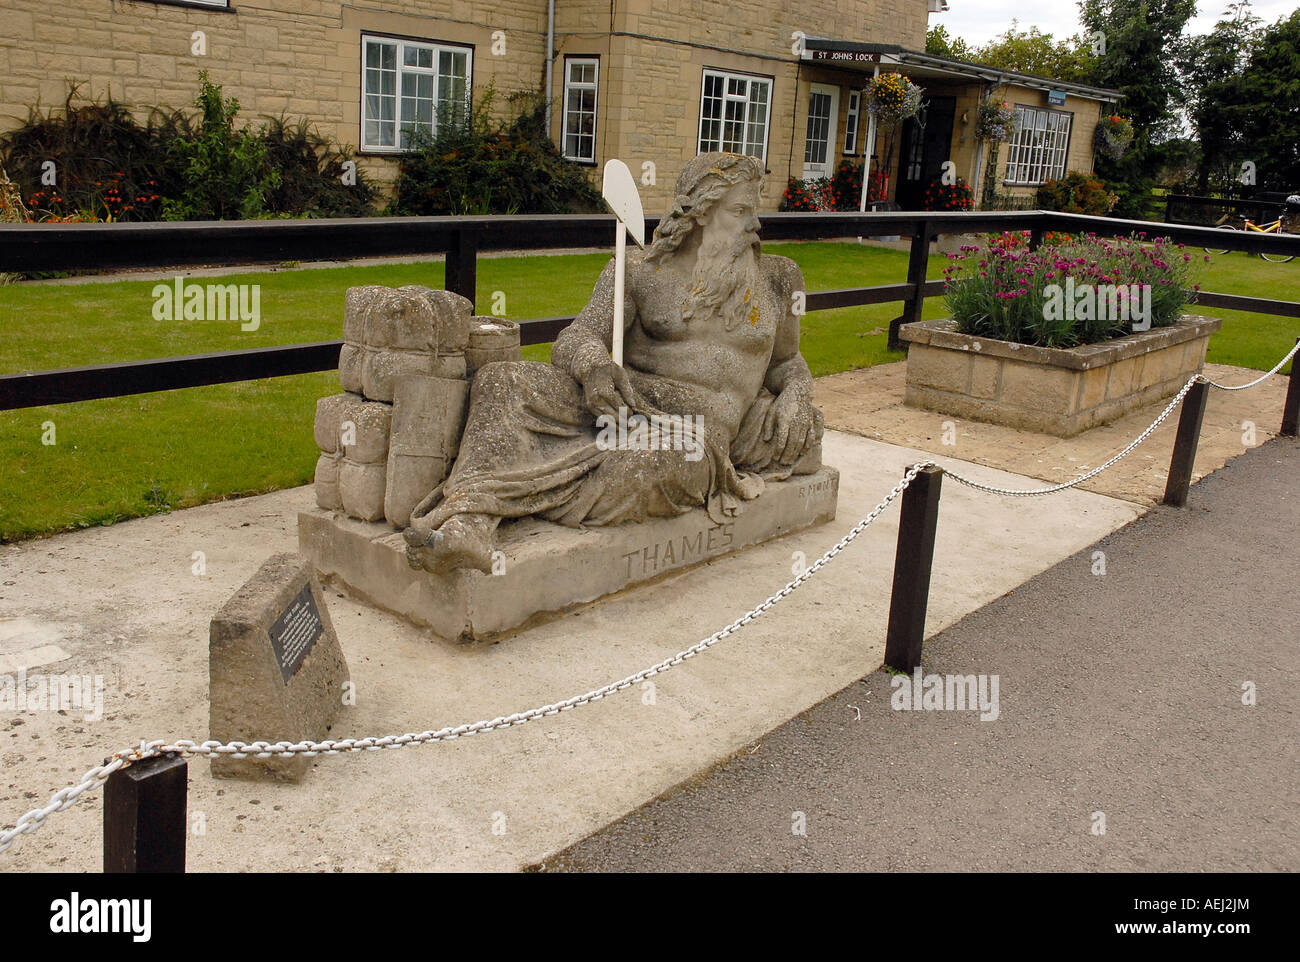 The Statue of Old Father Thames at St John's Lock, Lechlade, Gloucestershire, England Stock Photo